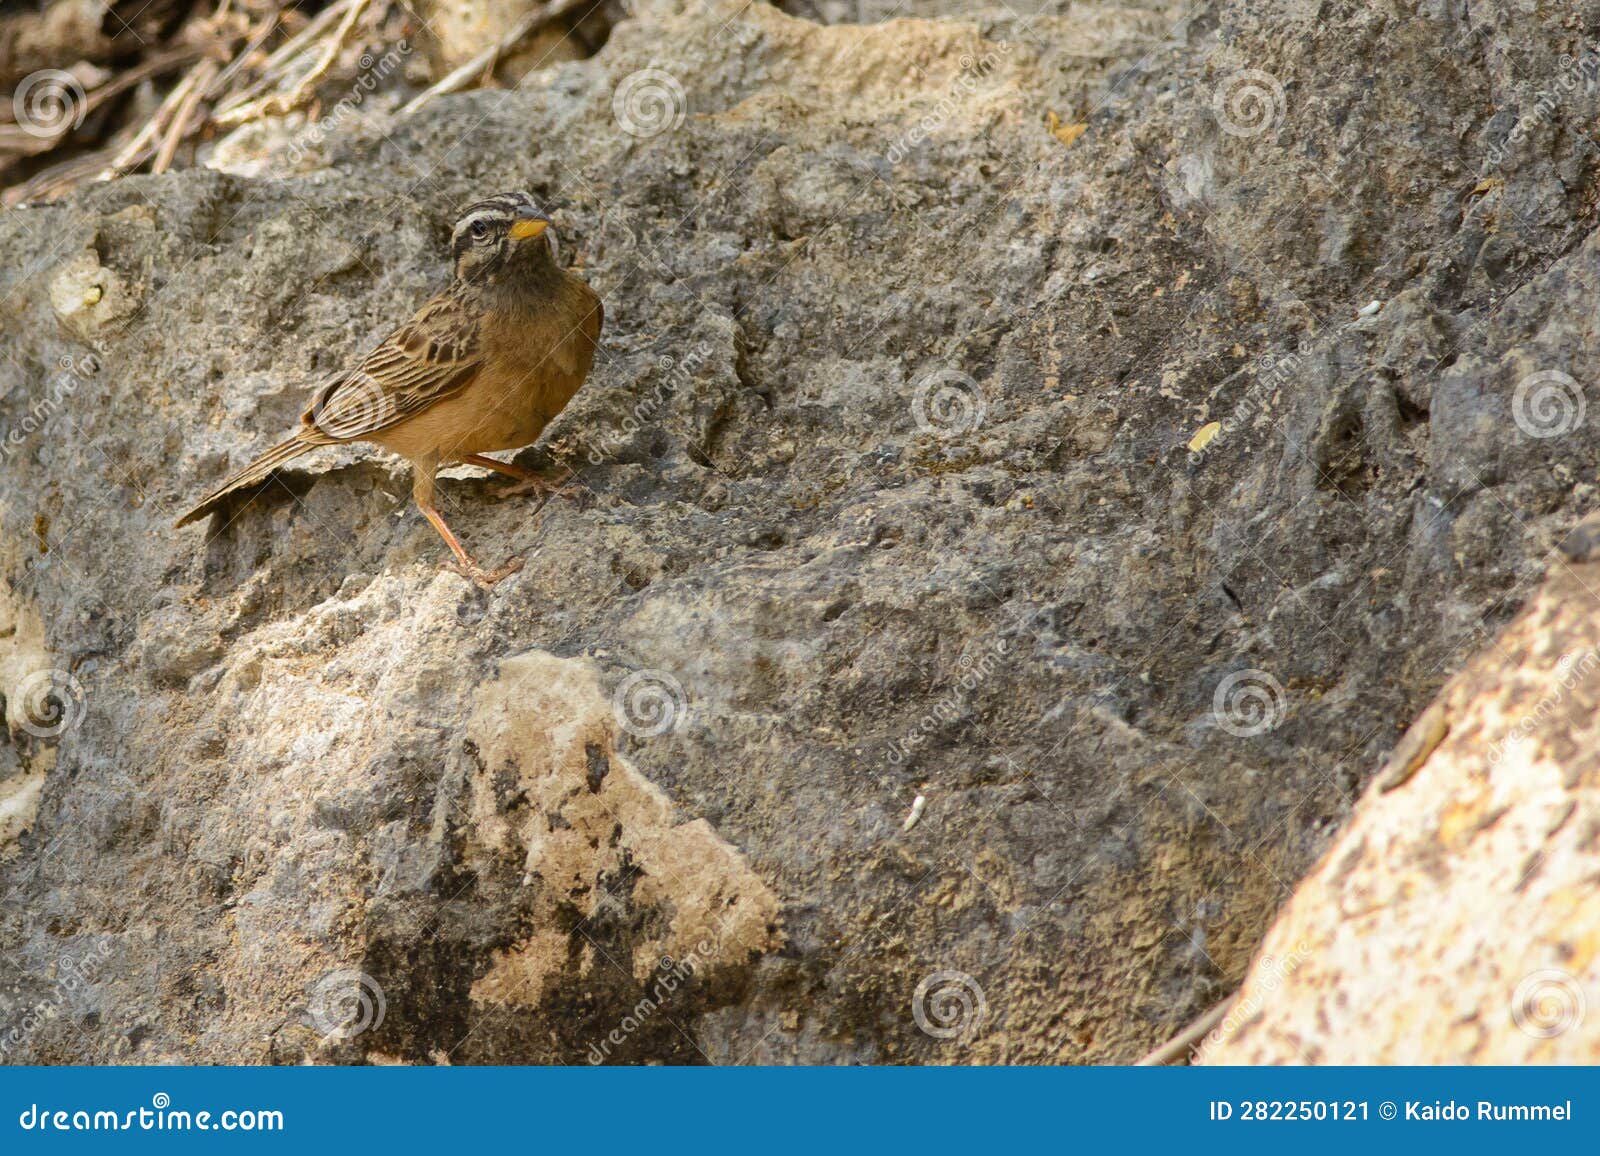 cinnamon-breasted bunting on a rock